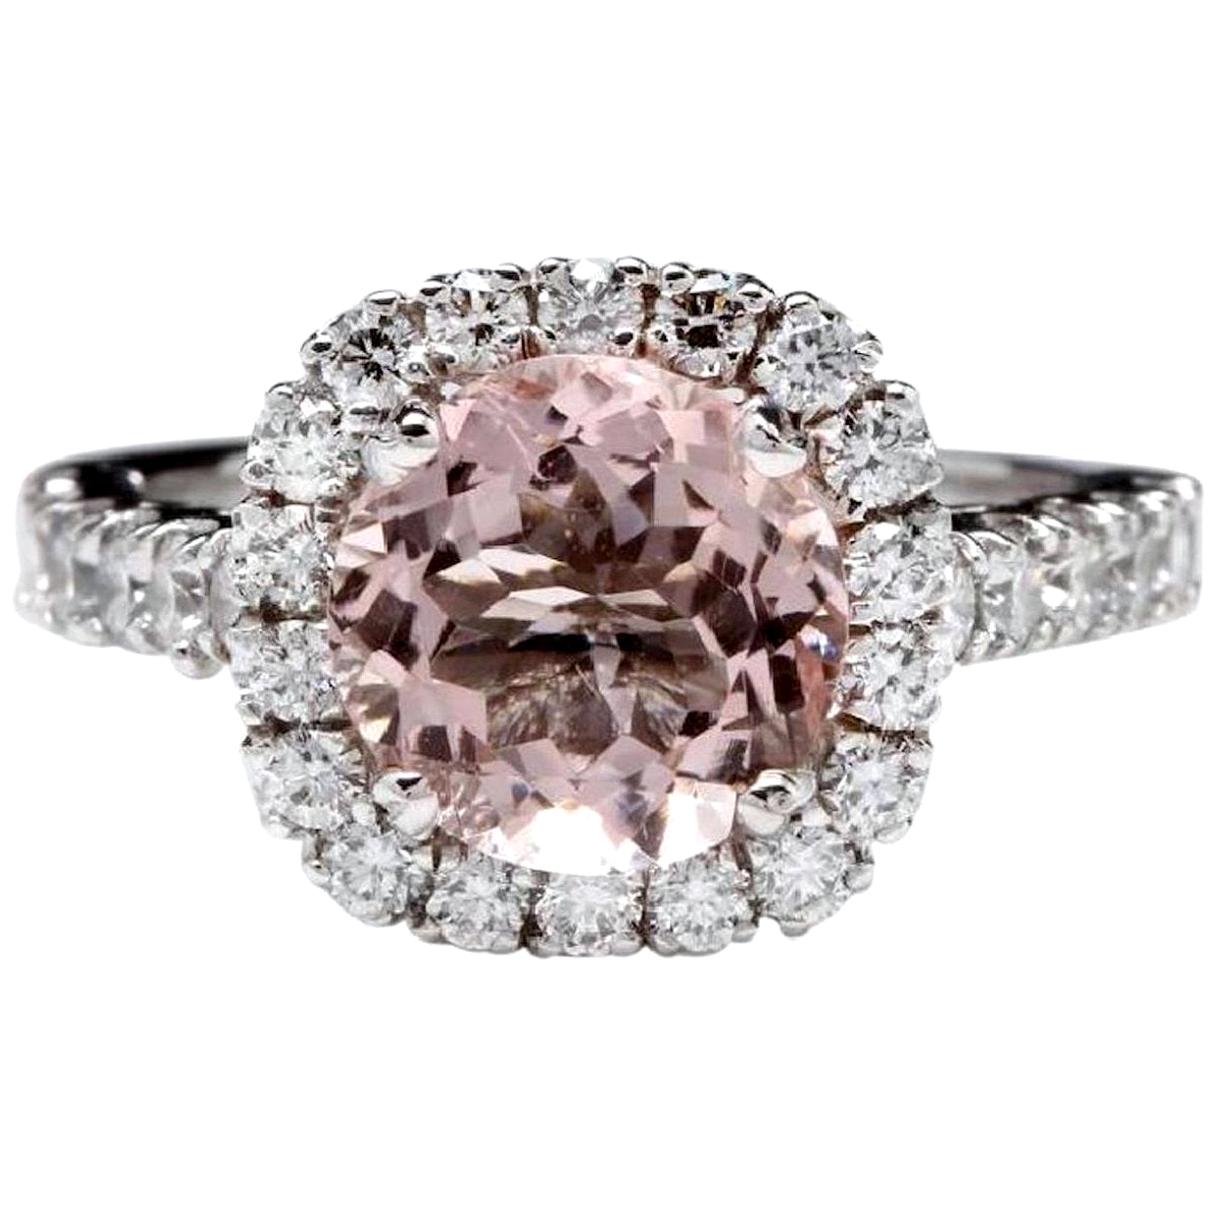 3.65 Carat Exquisite Natural Morganite and Diamond 14K Solid White Gold Ring